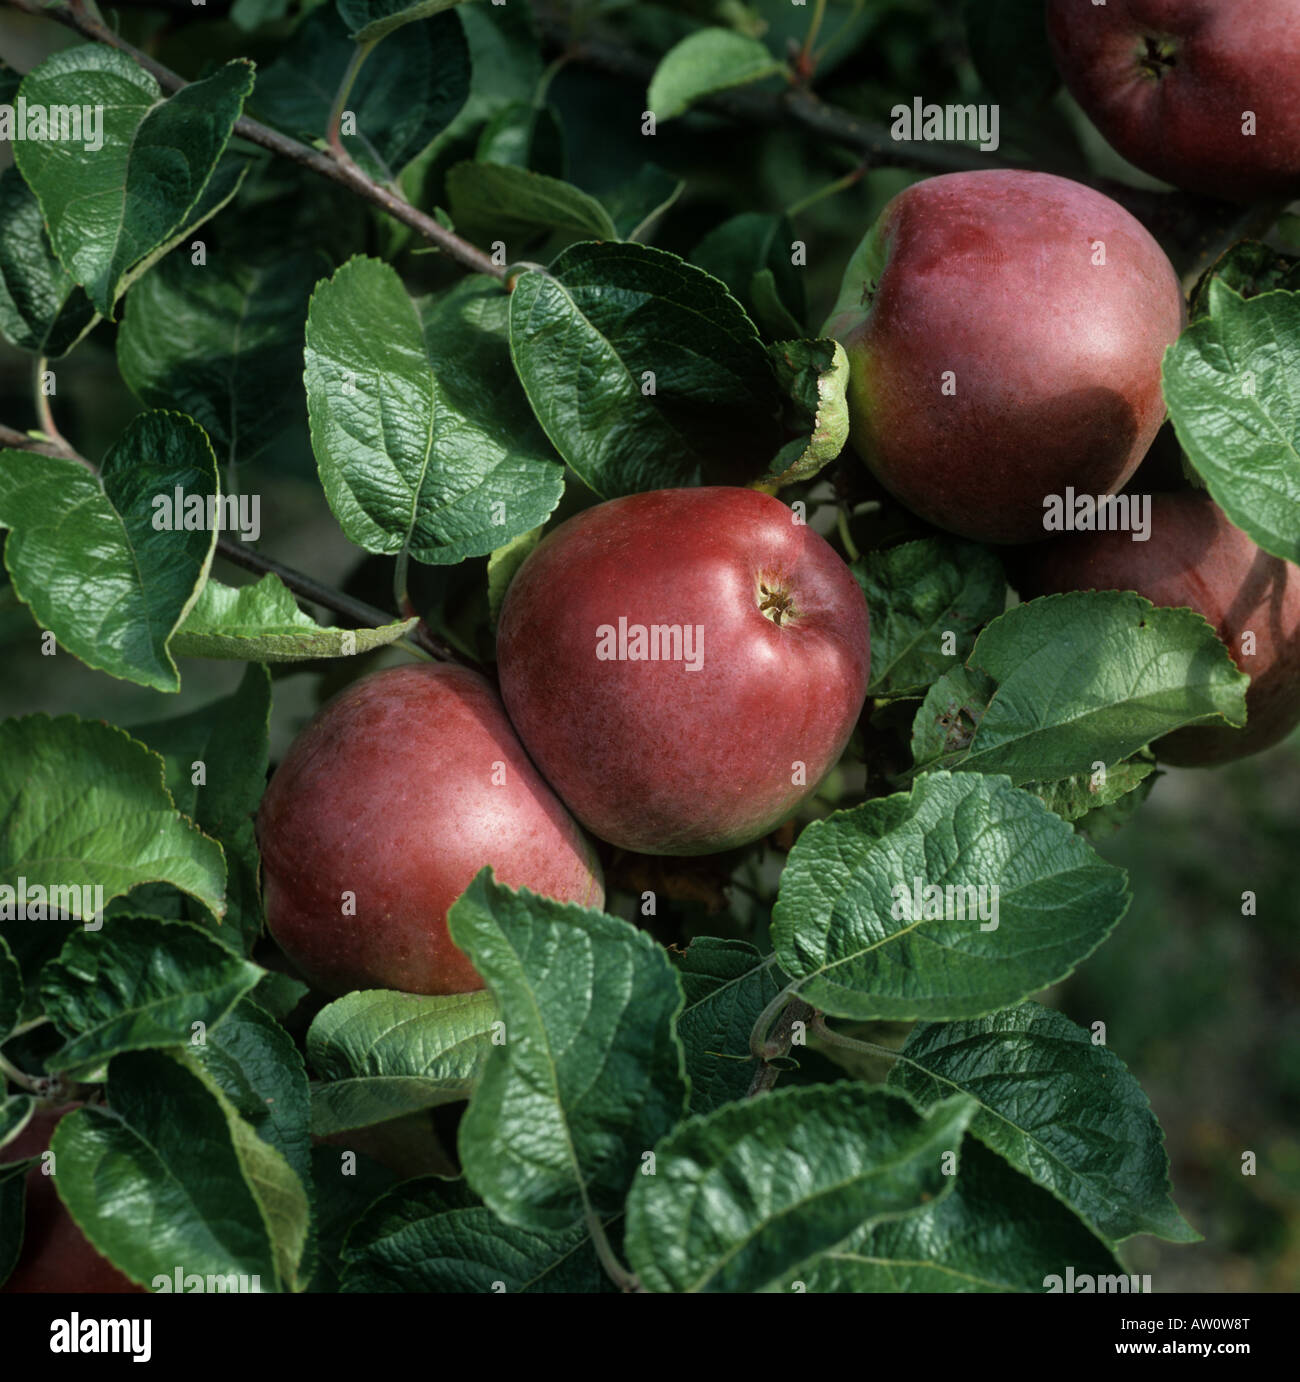 Mature Spartan apples on the tree Stock Photo